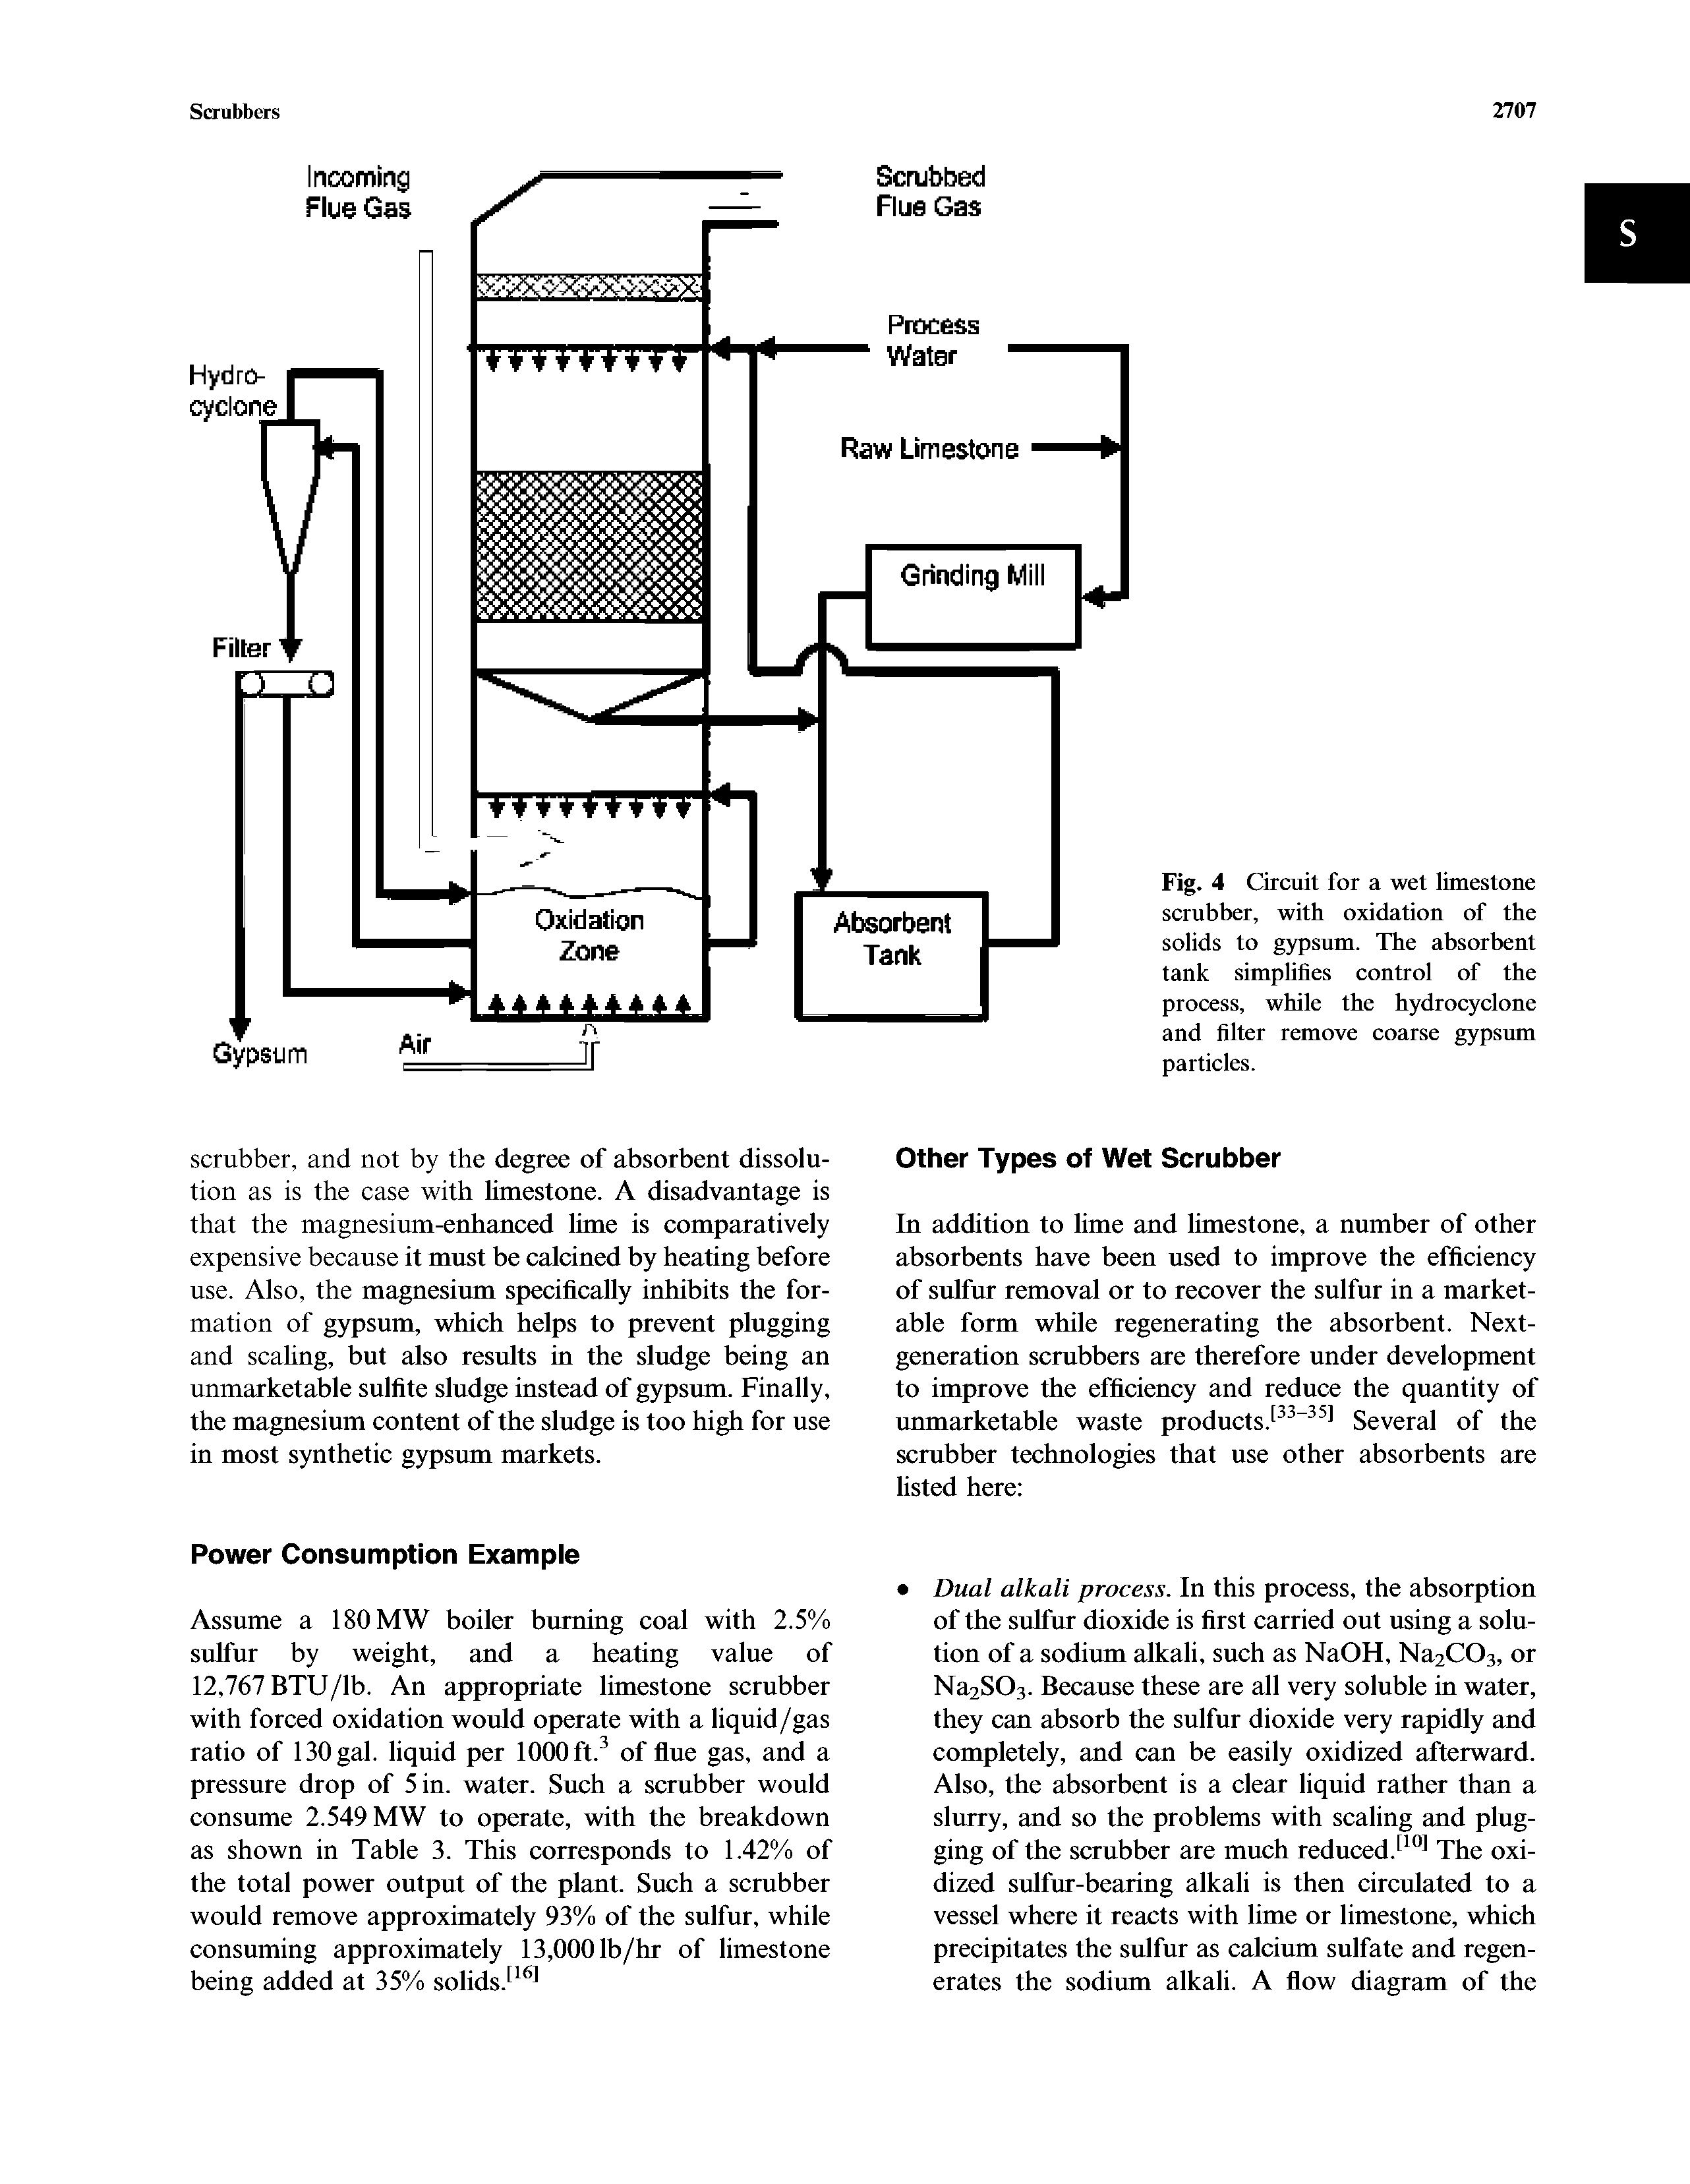 Fig. 4 Circuit for a wet limestone scrubber, with oxidation of the solids to gypsum. The absorbent tank simplifies control of the process, while the hydrocyclone and filter remove coarse gypsum particles.